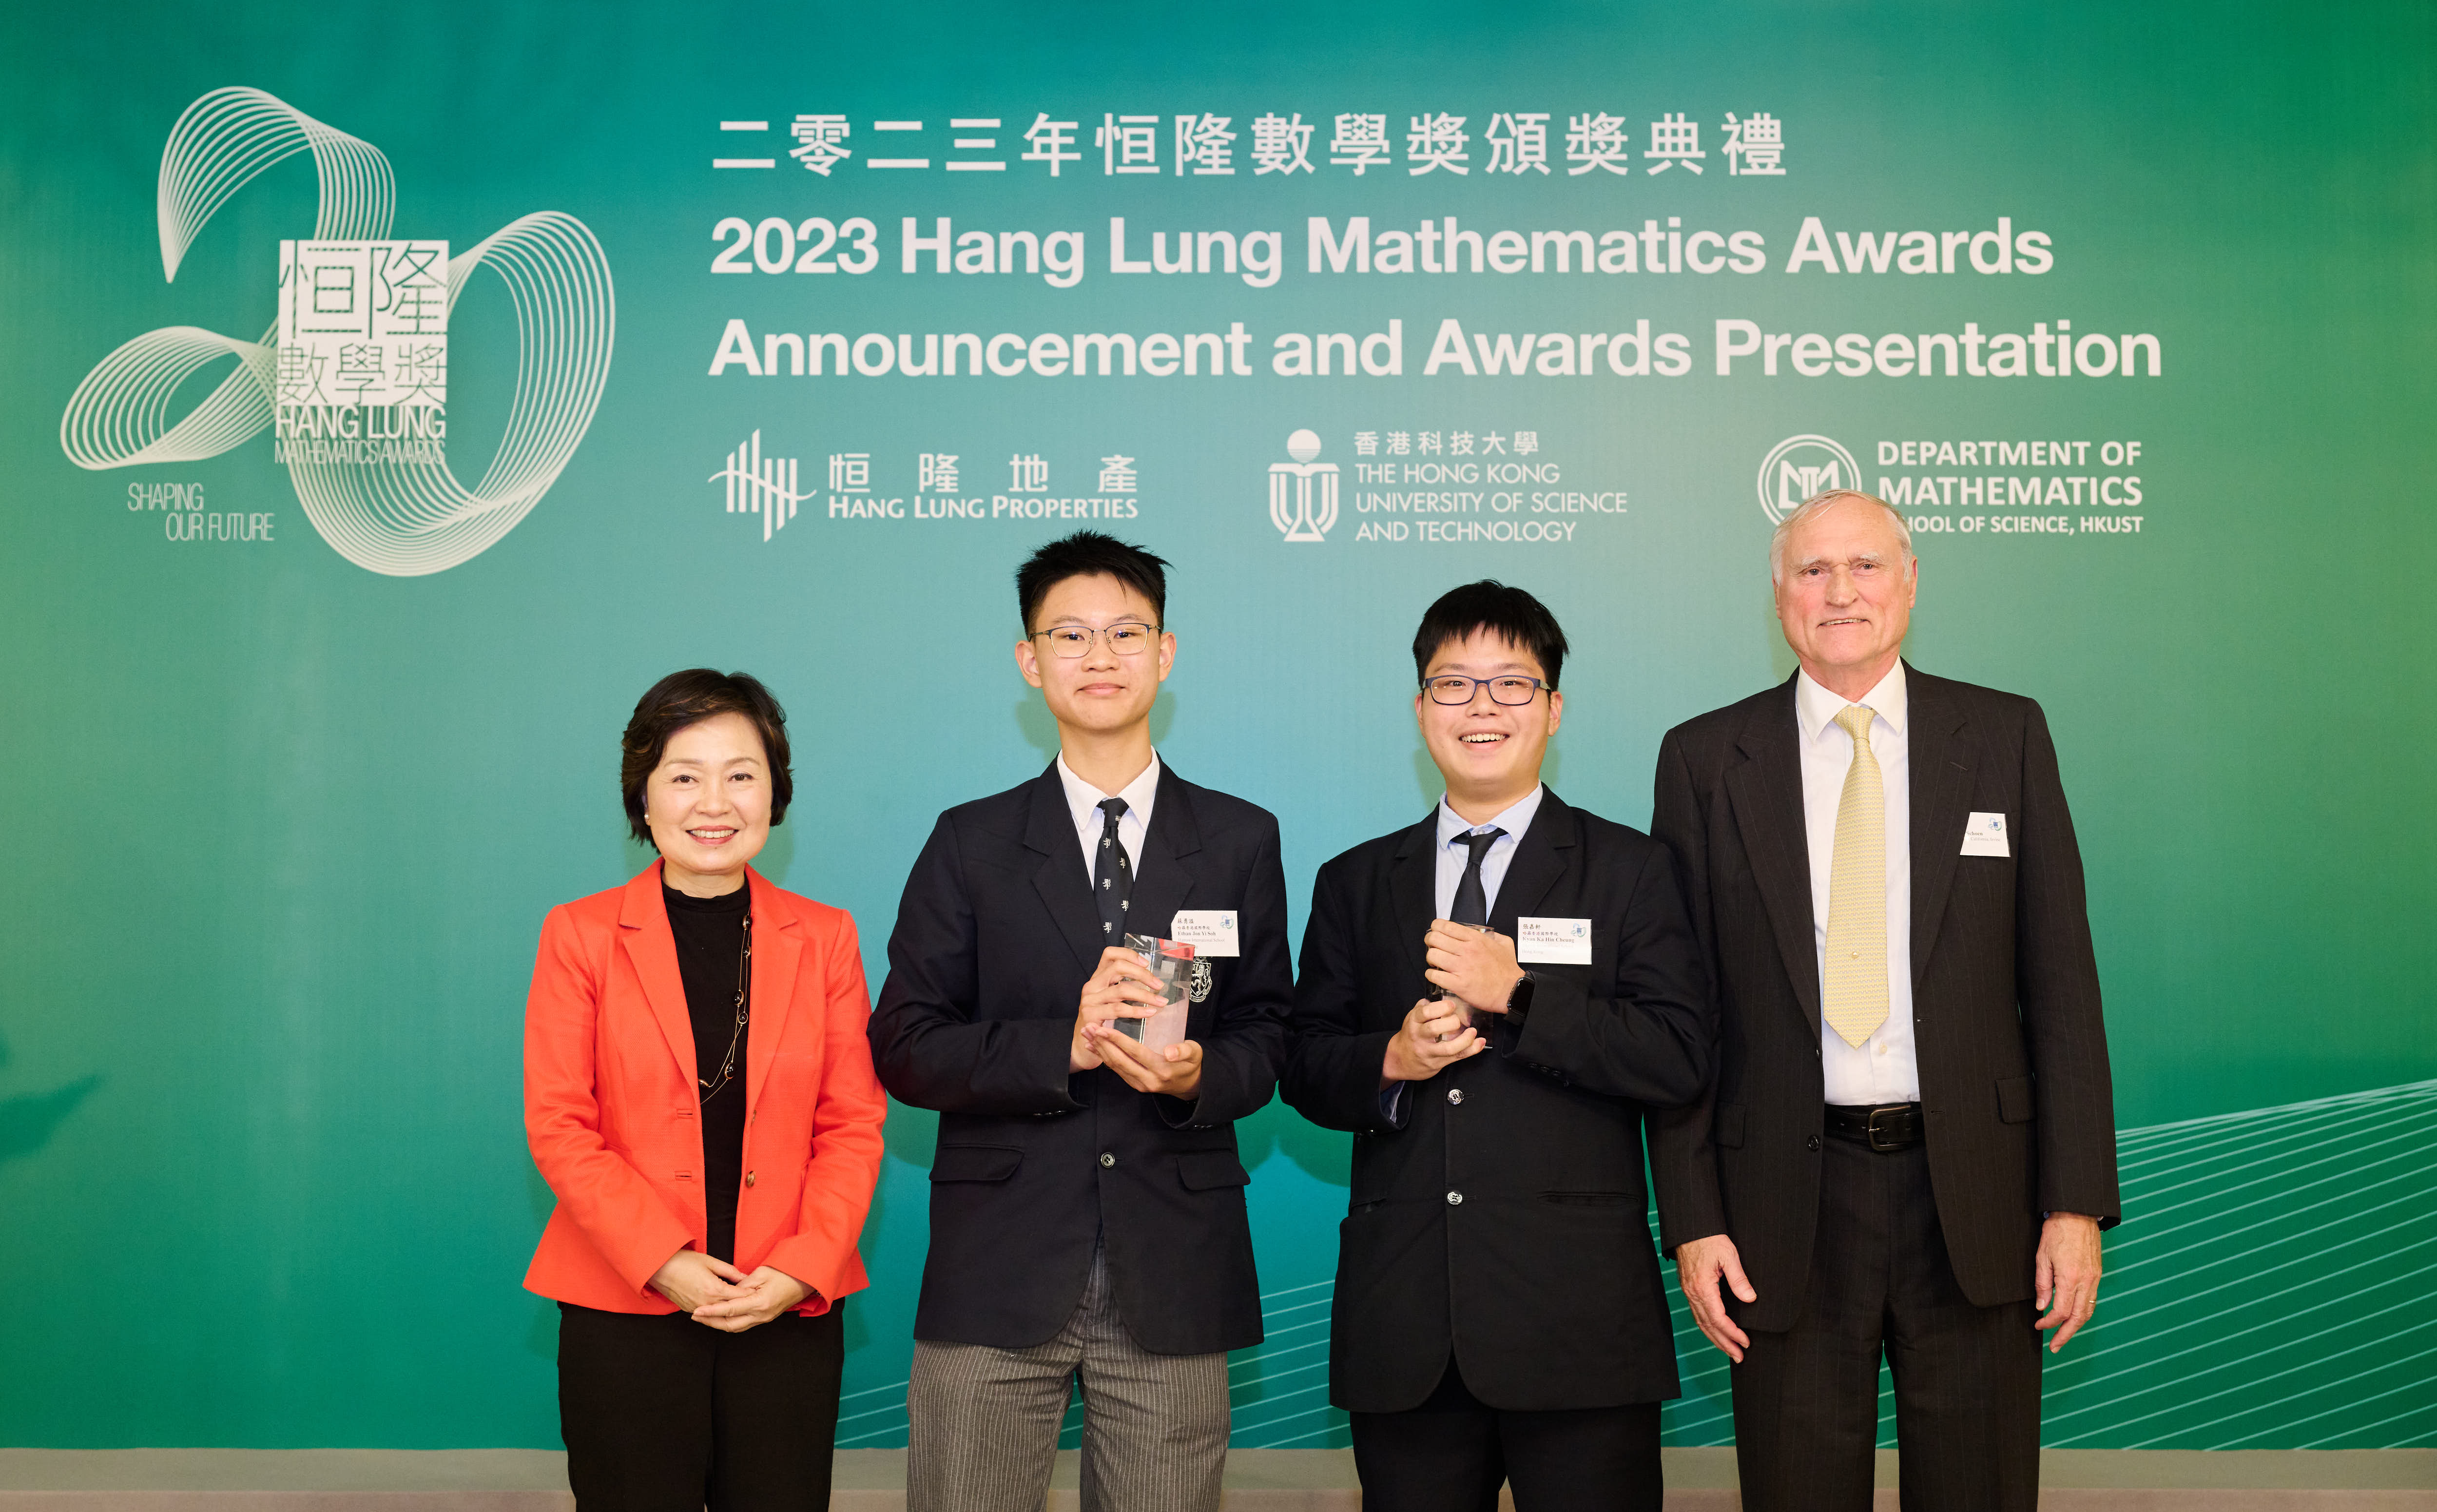 Dr. Christine Choi, Secretary for Education of the Hong Kong Special Administrative Region (left), and Professor Richard Schoen, 2017 Wolf Prize Laureate in Mathematics and Chair of the 2023 HLMA Scientific Committee (right) with the 2023 Hang Lung Mathematics Awards Gold Award winners Kyan Ka Hin Cheung and Ethan Jon Yi Soh from Harrow International School Hong Kong. Their research title is “On the Properties of the Semigroup Generated by the RL Fractional Integral”